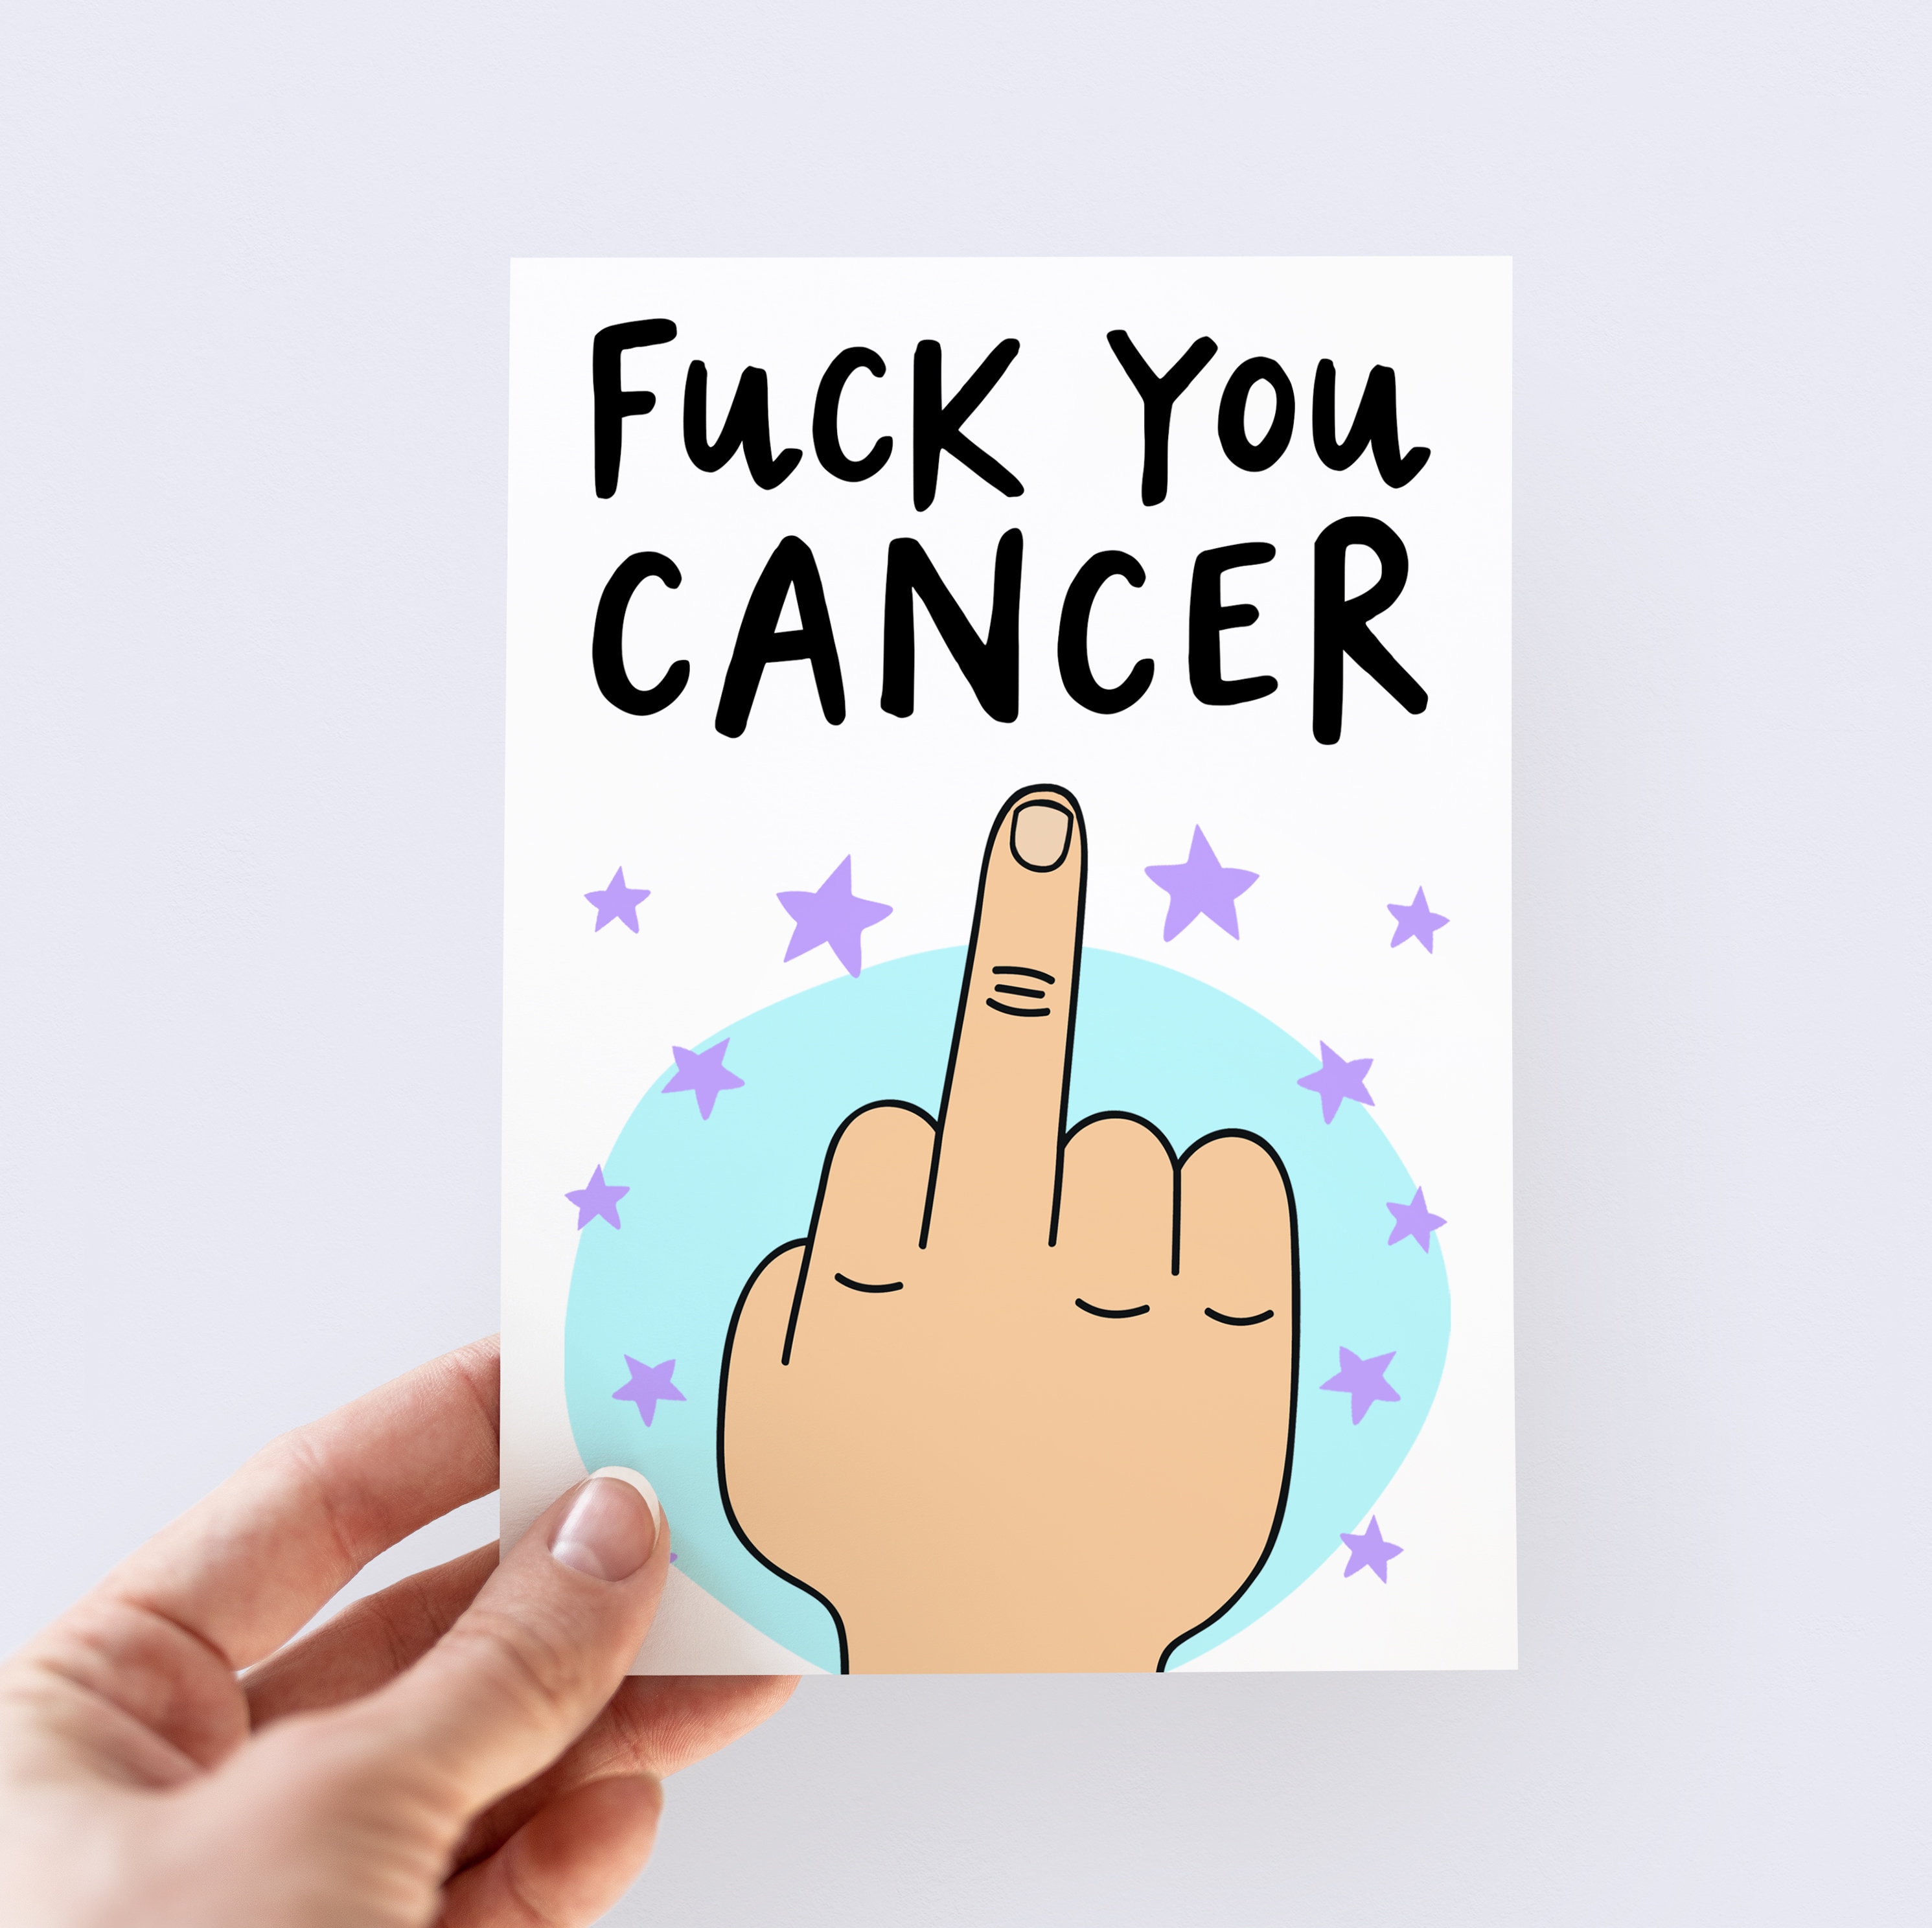 Fuck You Cancer Card Kick Cancers Ass Rude Cancer Card image image